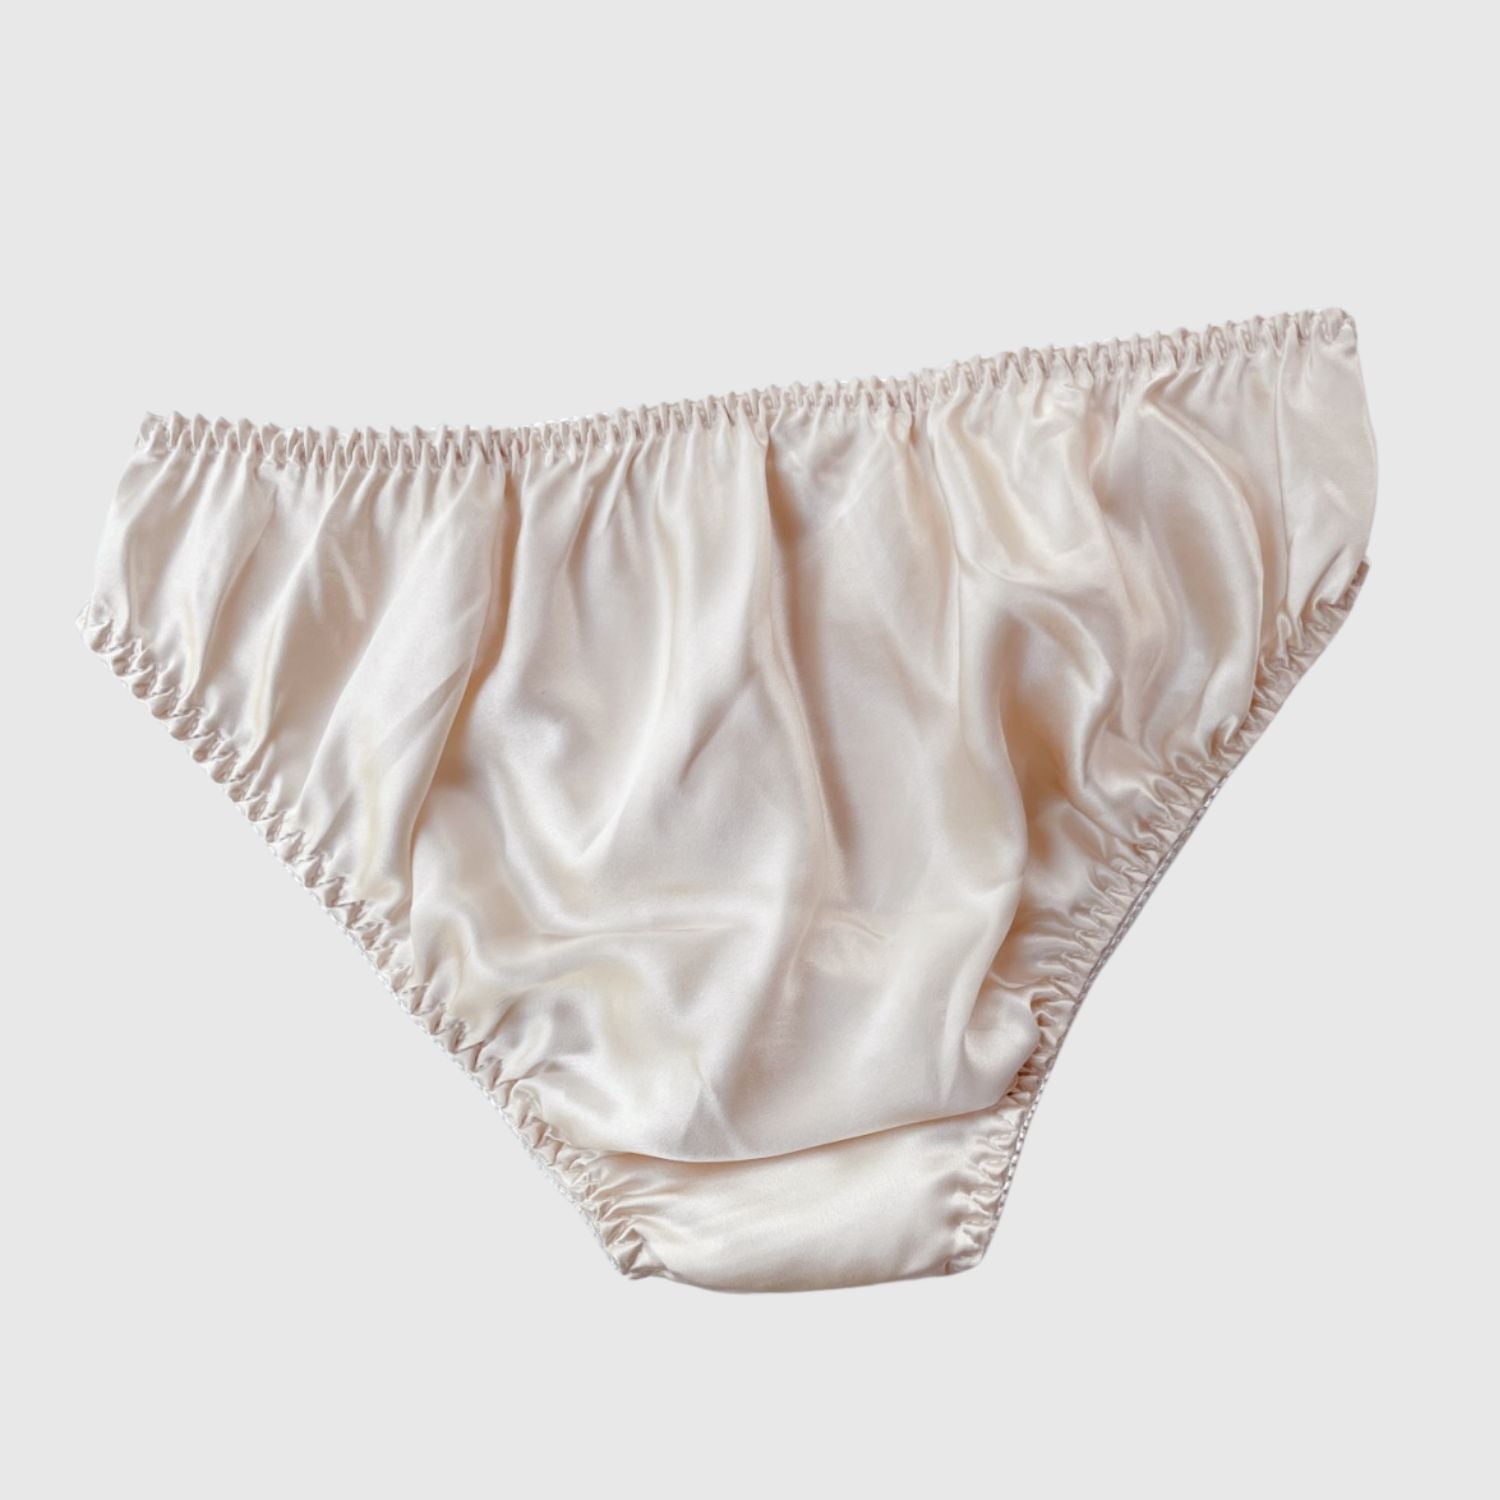 Bridal Silk lace underwear brief for women | Made in Canada lingerie ...